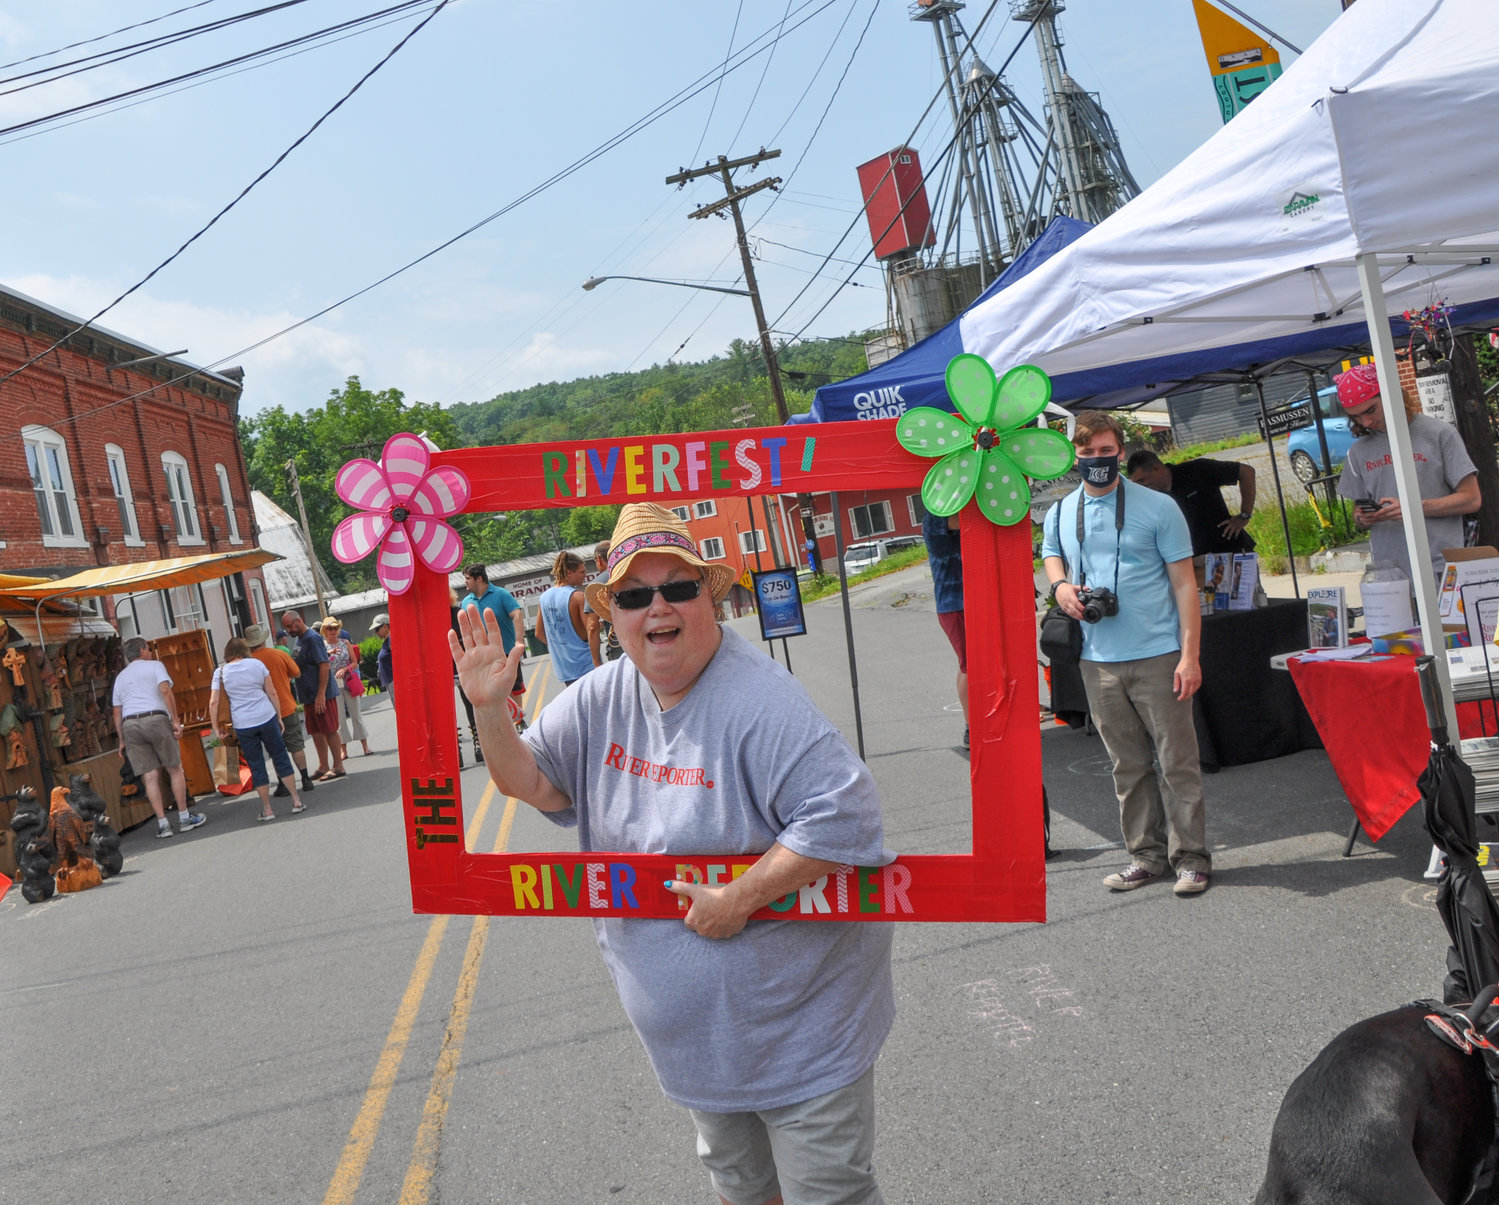 I arrived in Narrowsburg early in order to spend a few hours with some of my pals from the award-winning River Reporter at last Sunday’s Riverfest.